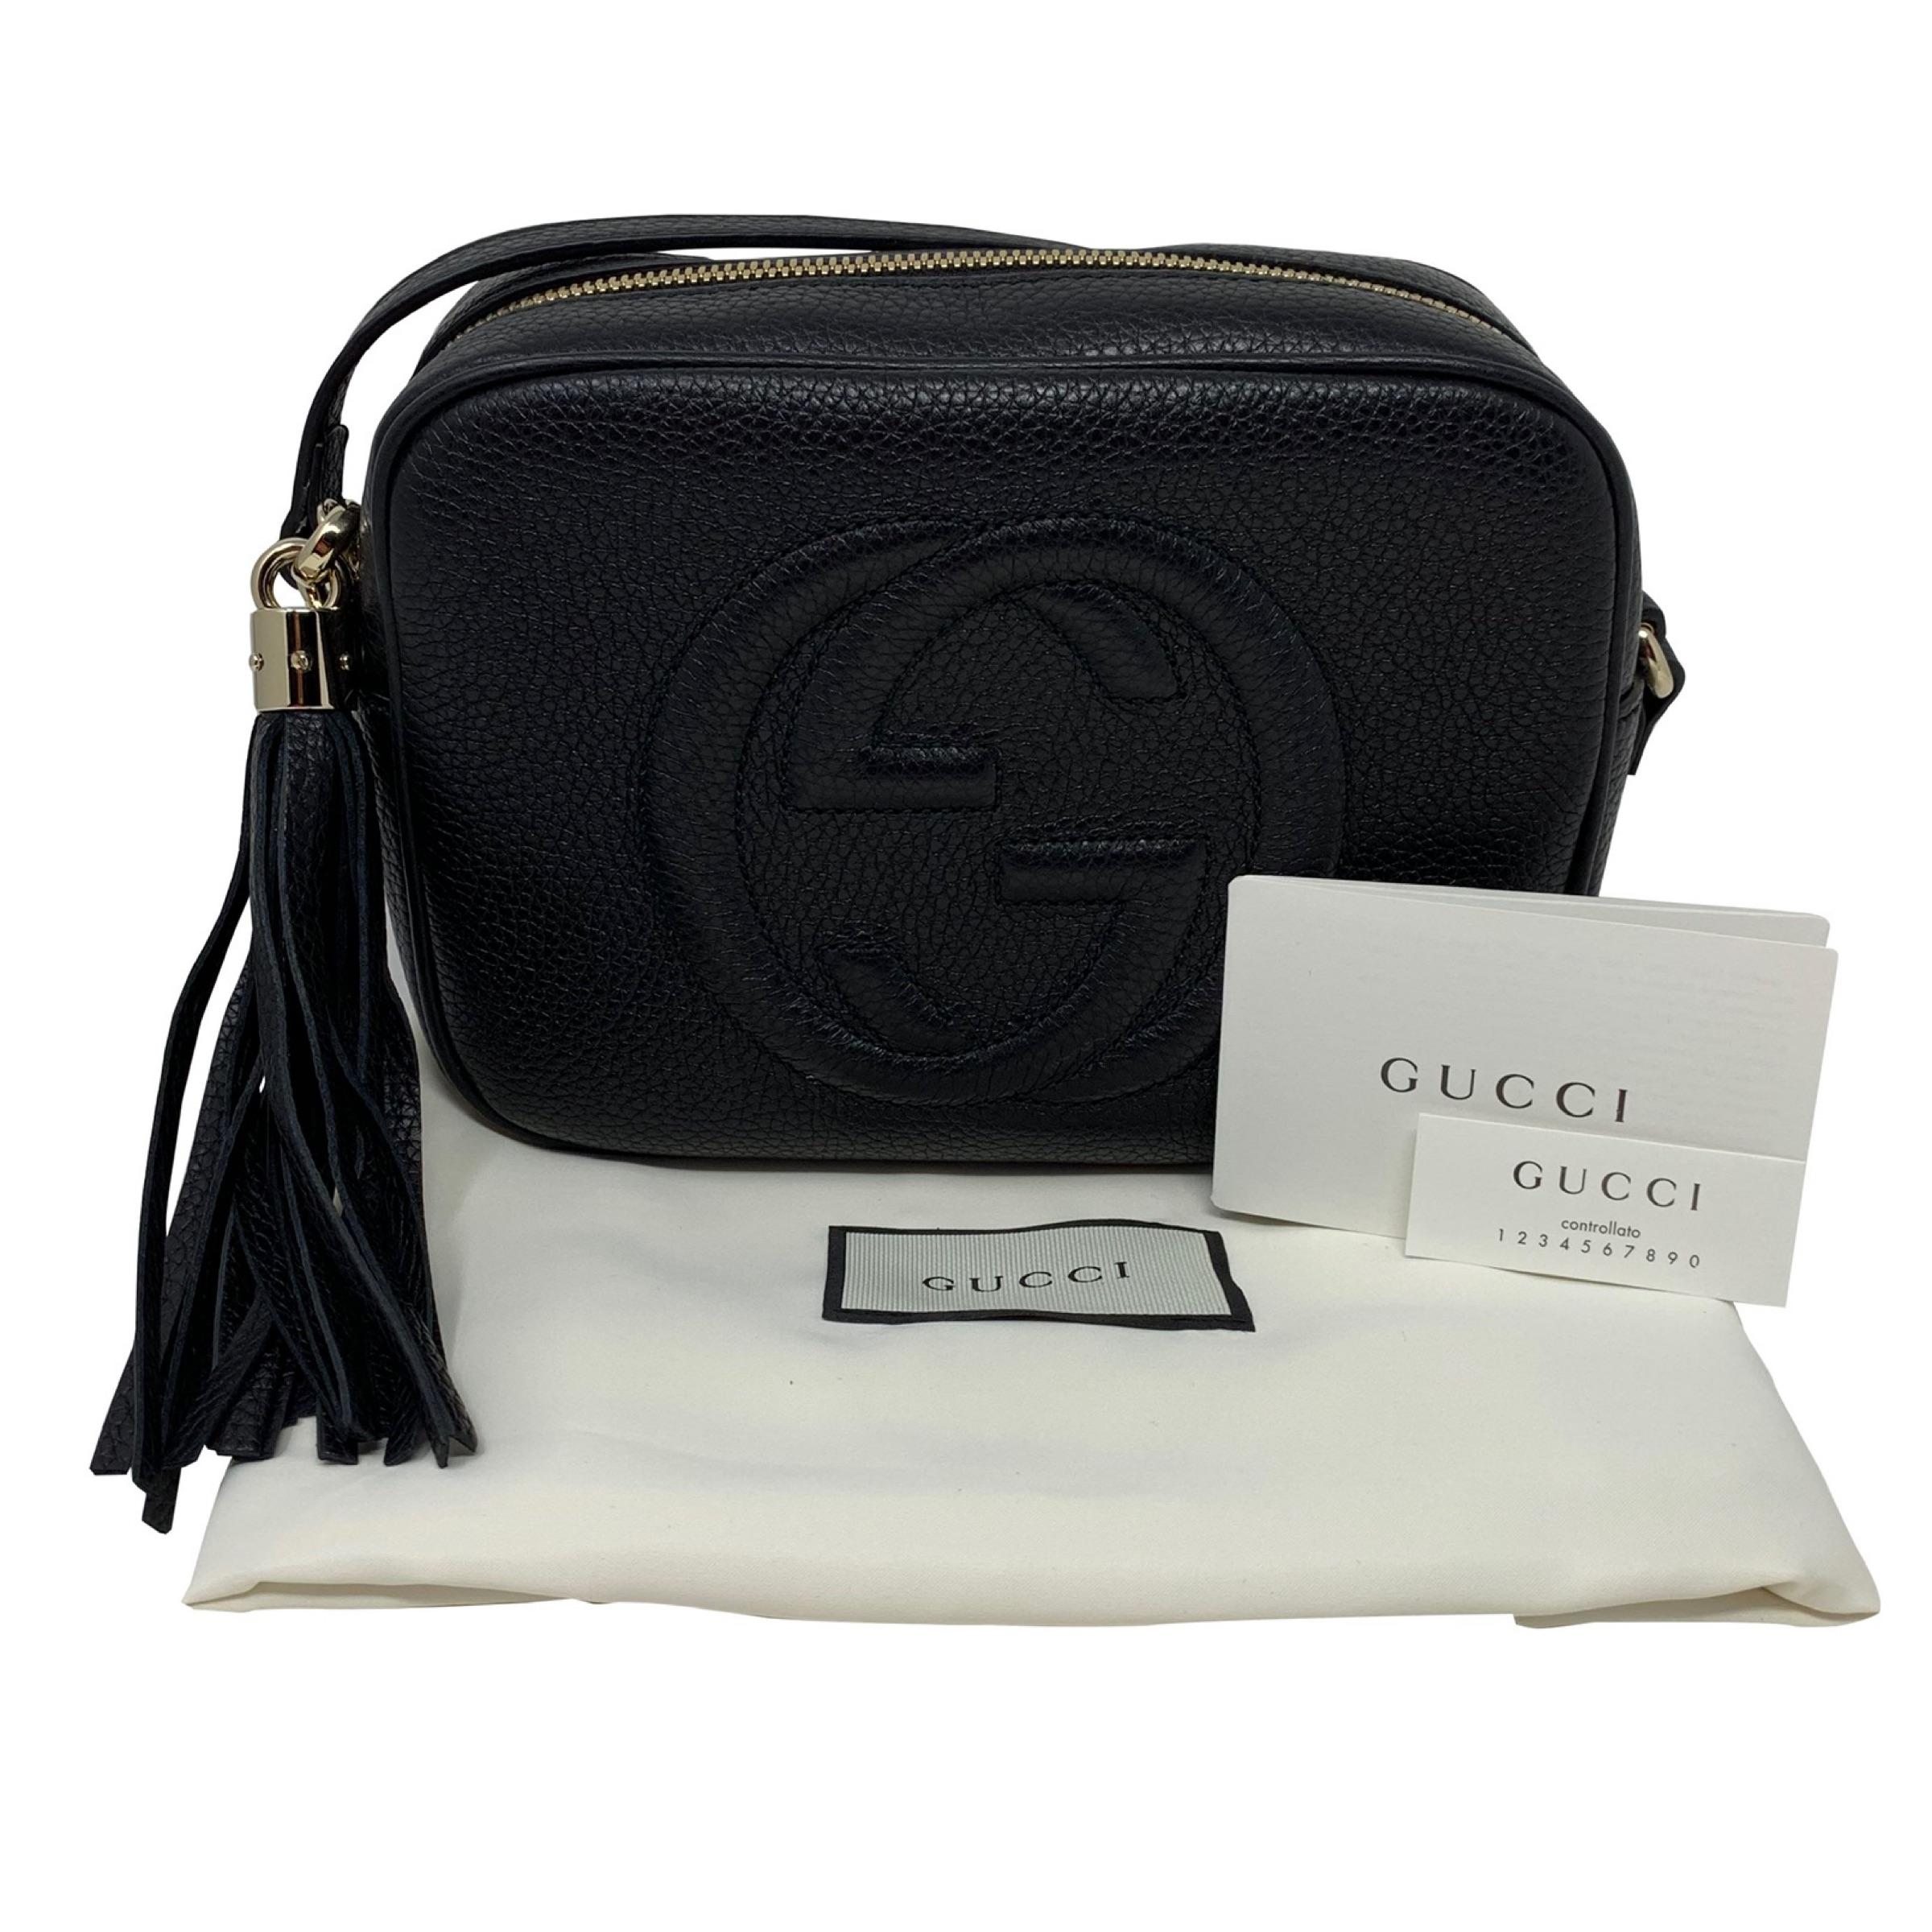 NEW Gucci Black Small Soho Disco Leather Crossbody Bag For Sale 13